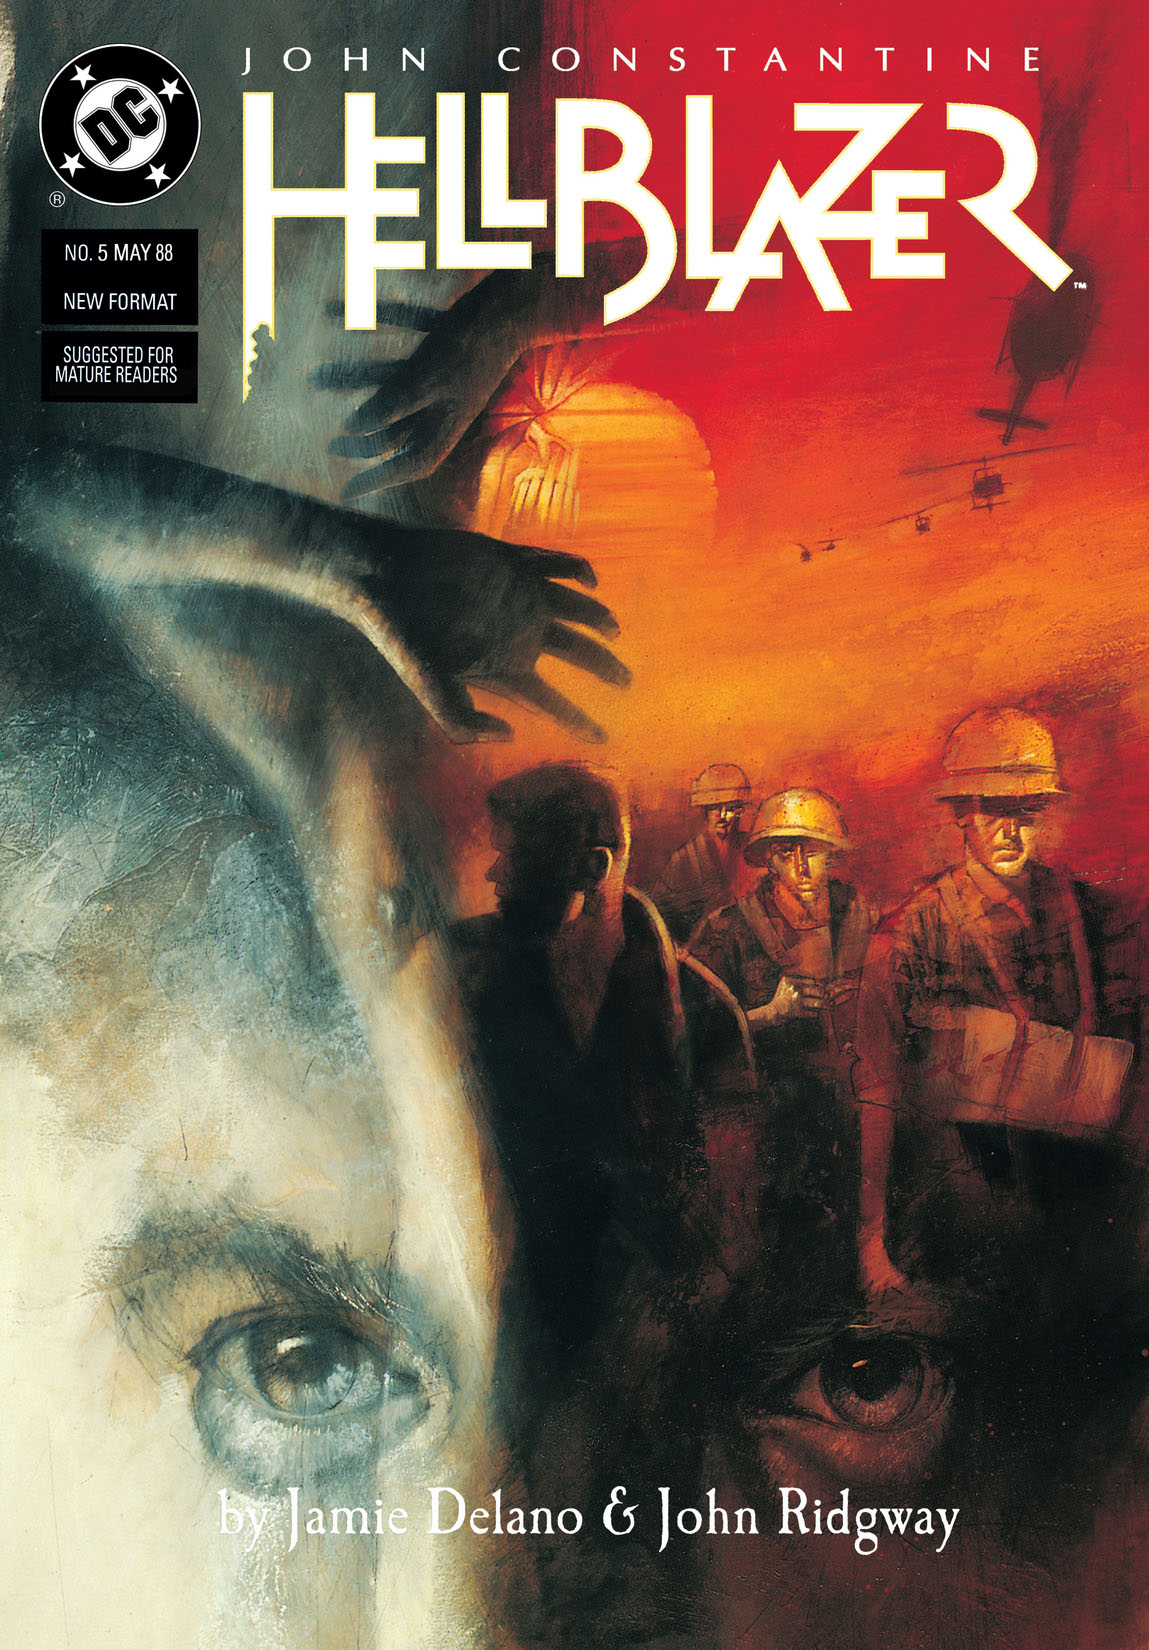 Hellblazer #5 preview images